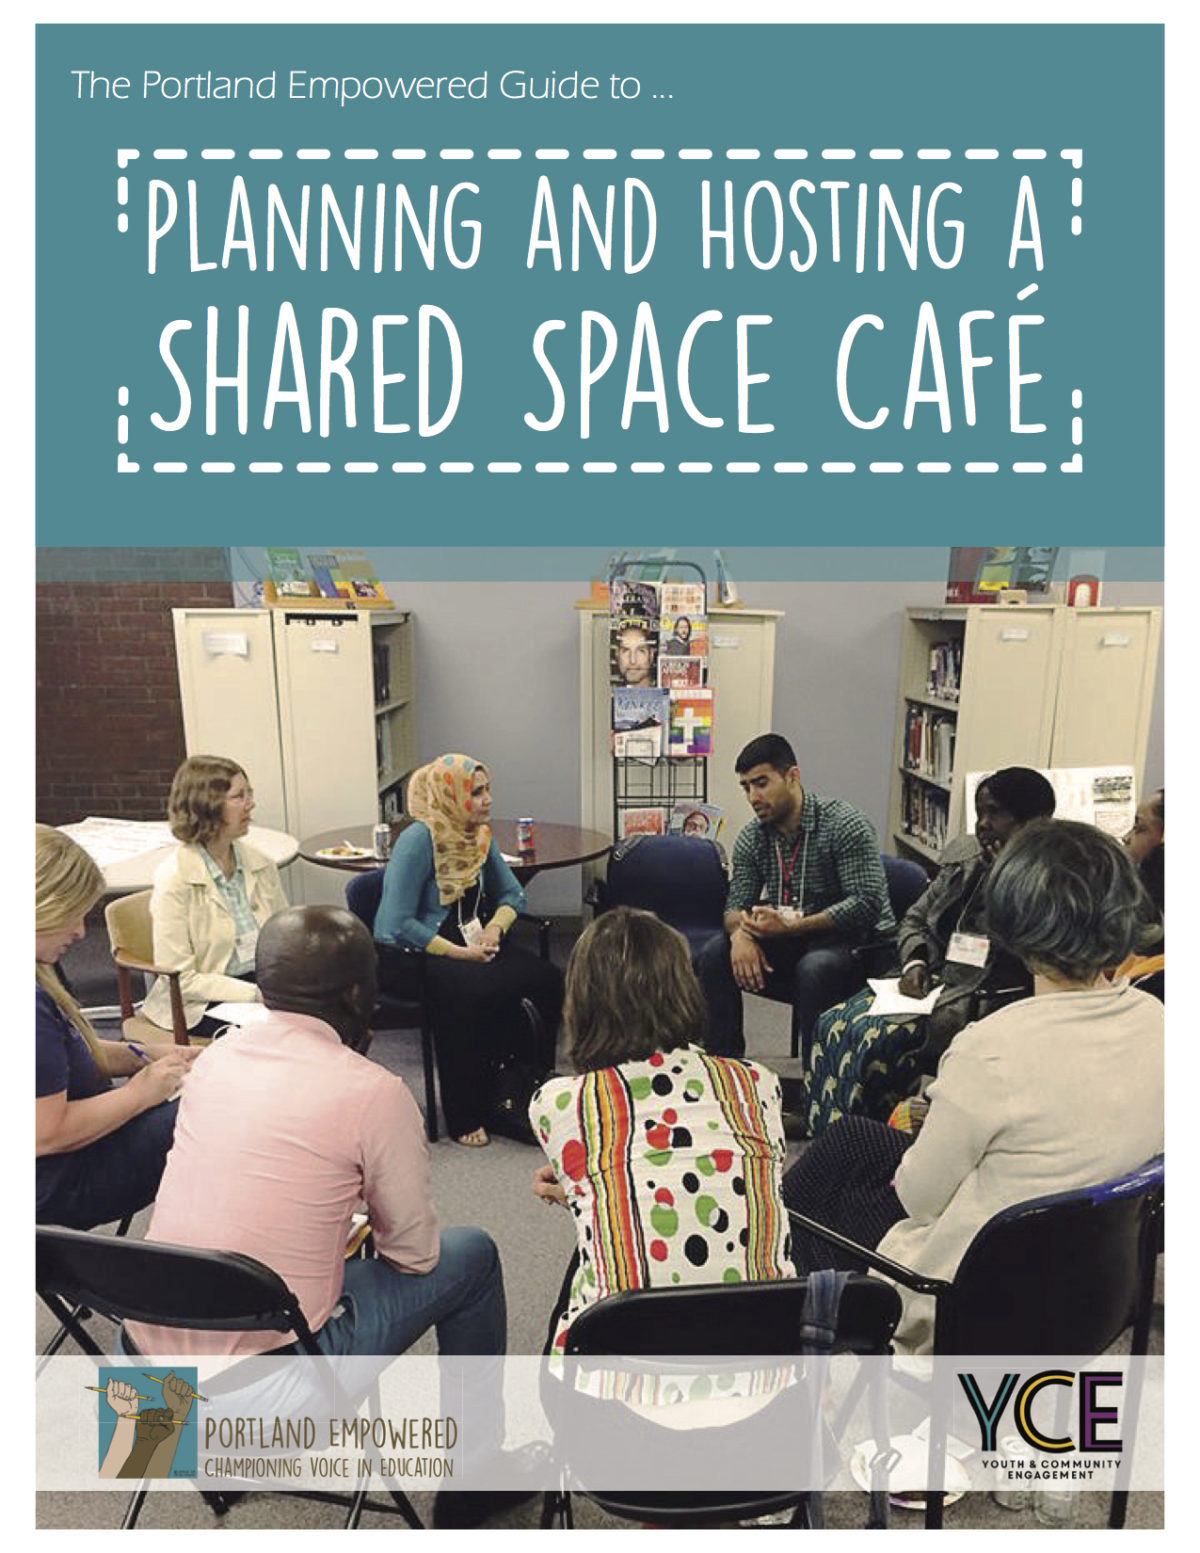 The cover image of Portland Empowered's The Portland Empowered Guide to Planning and Hosting a Shared Space Café, which describes the steps and strategies the organization uses to create inclusive and welcoming spaces for dialogue, listening, and decision-making between families and educators.